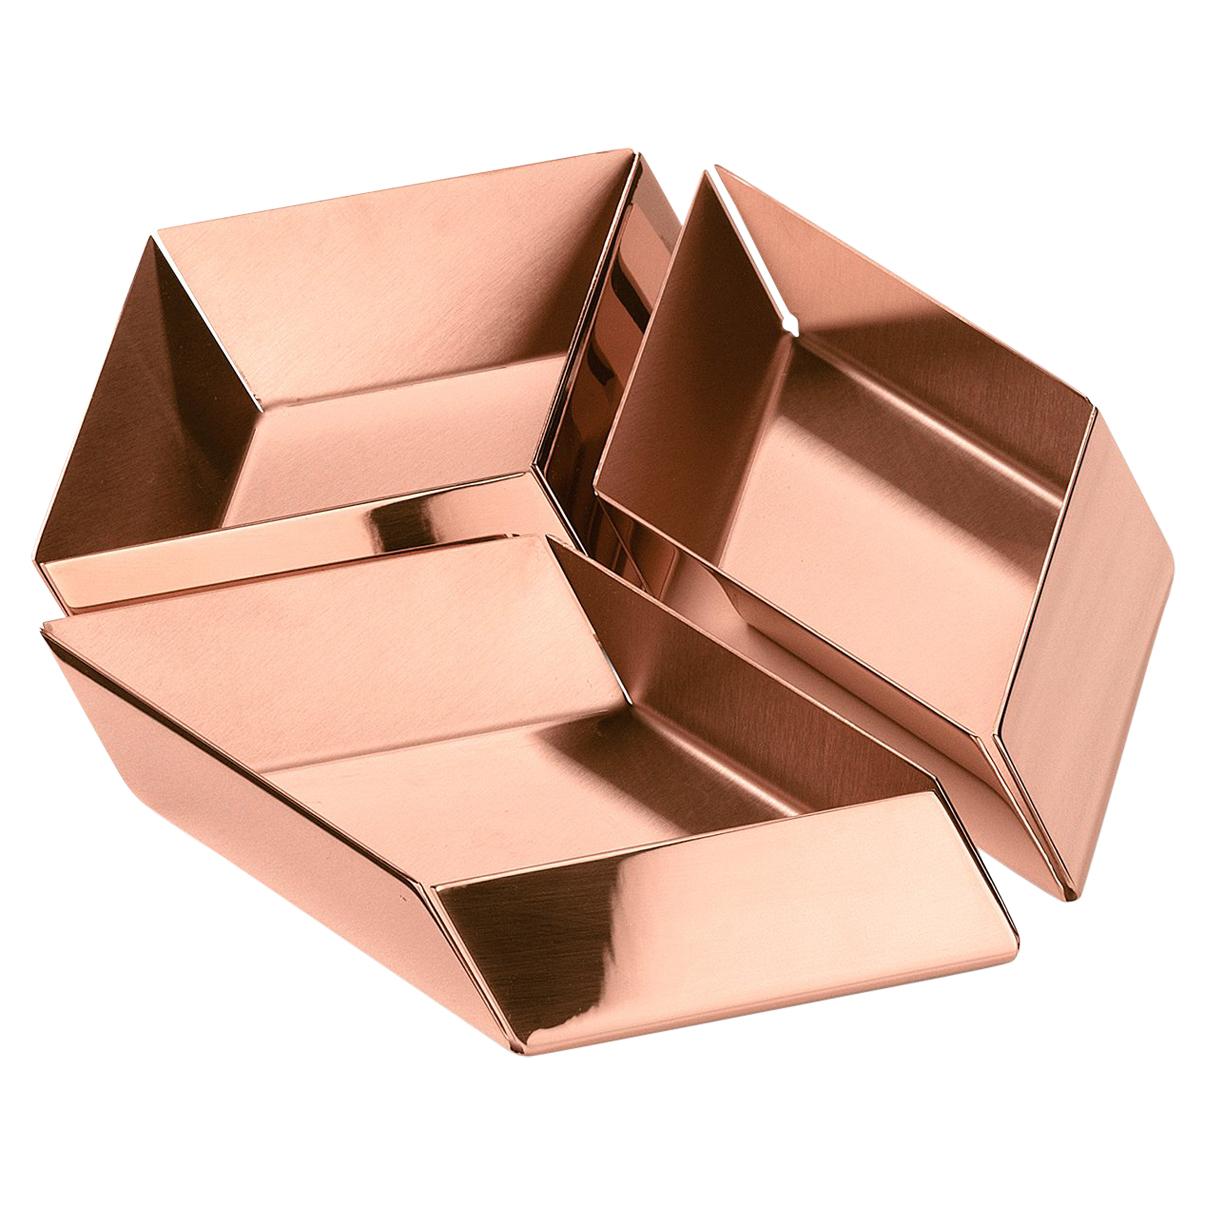 Ghidini 1961 Axonometry Small Cube Tray in Copper by Elisa Giovanni